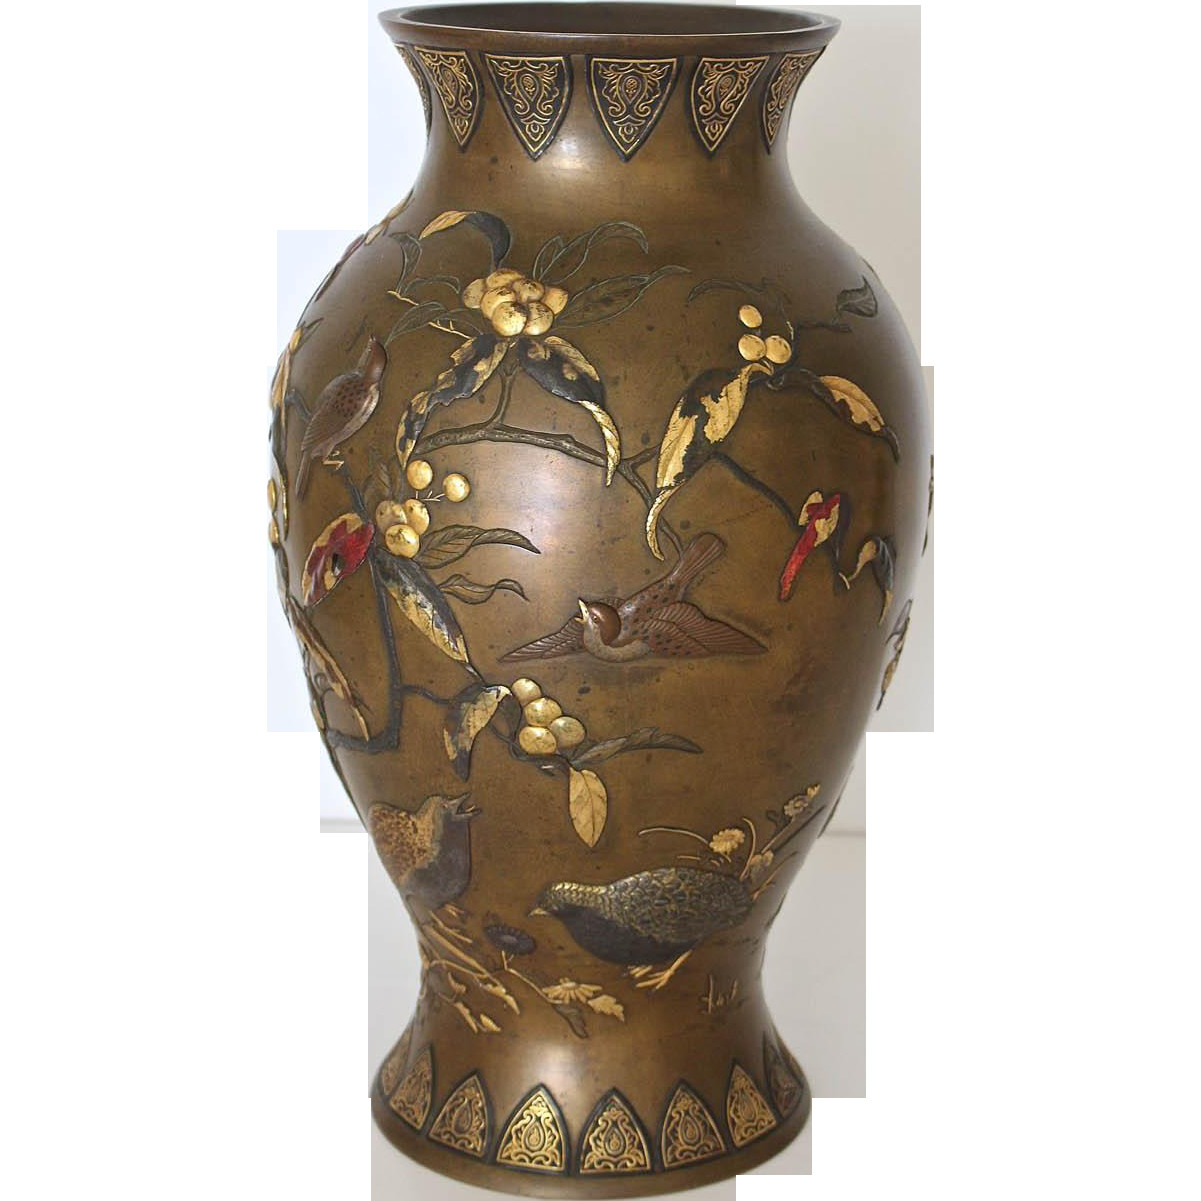 26 Great Antique Bronze Vase 2024 free download antique bronze vase of magnificent taisho period japanese mixed metal bronze vase with regard to ed76f642d3e2bde21f73035f8e0cd5d7